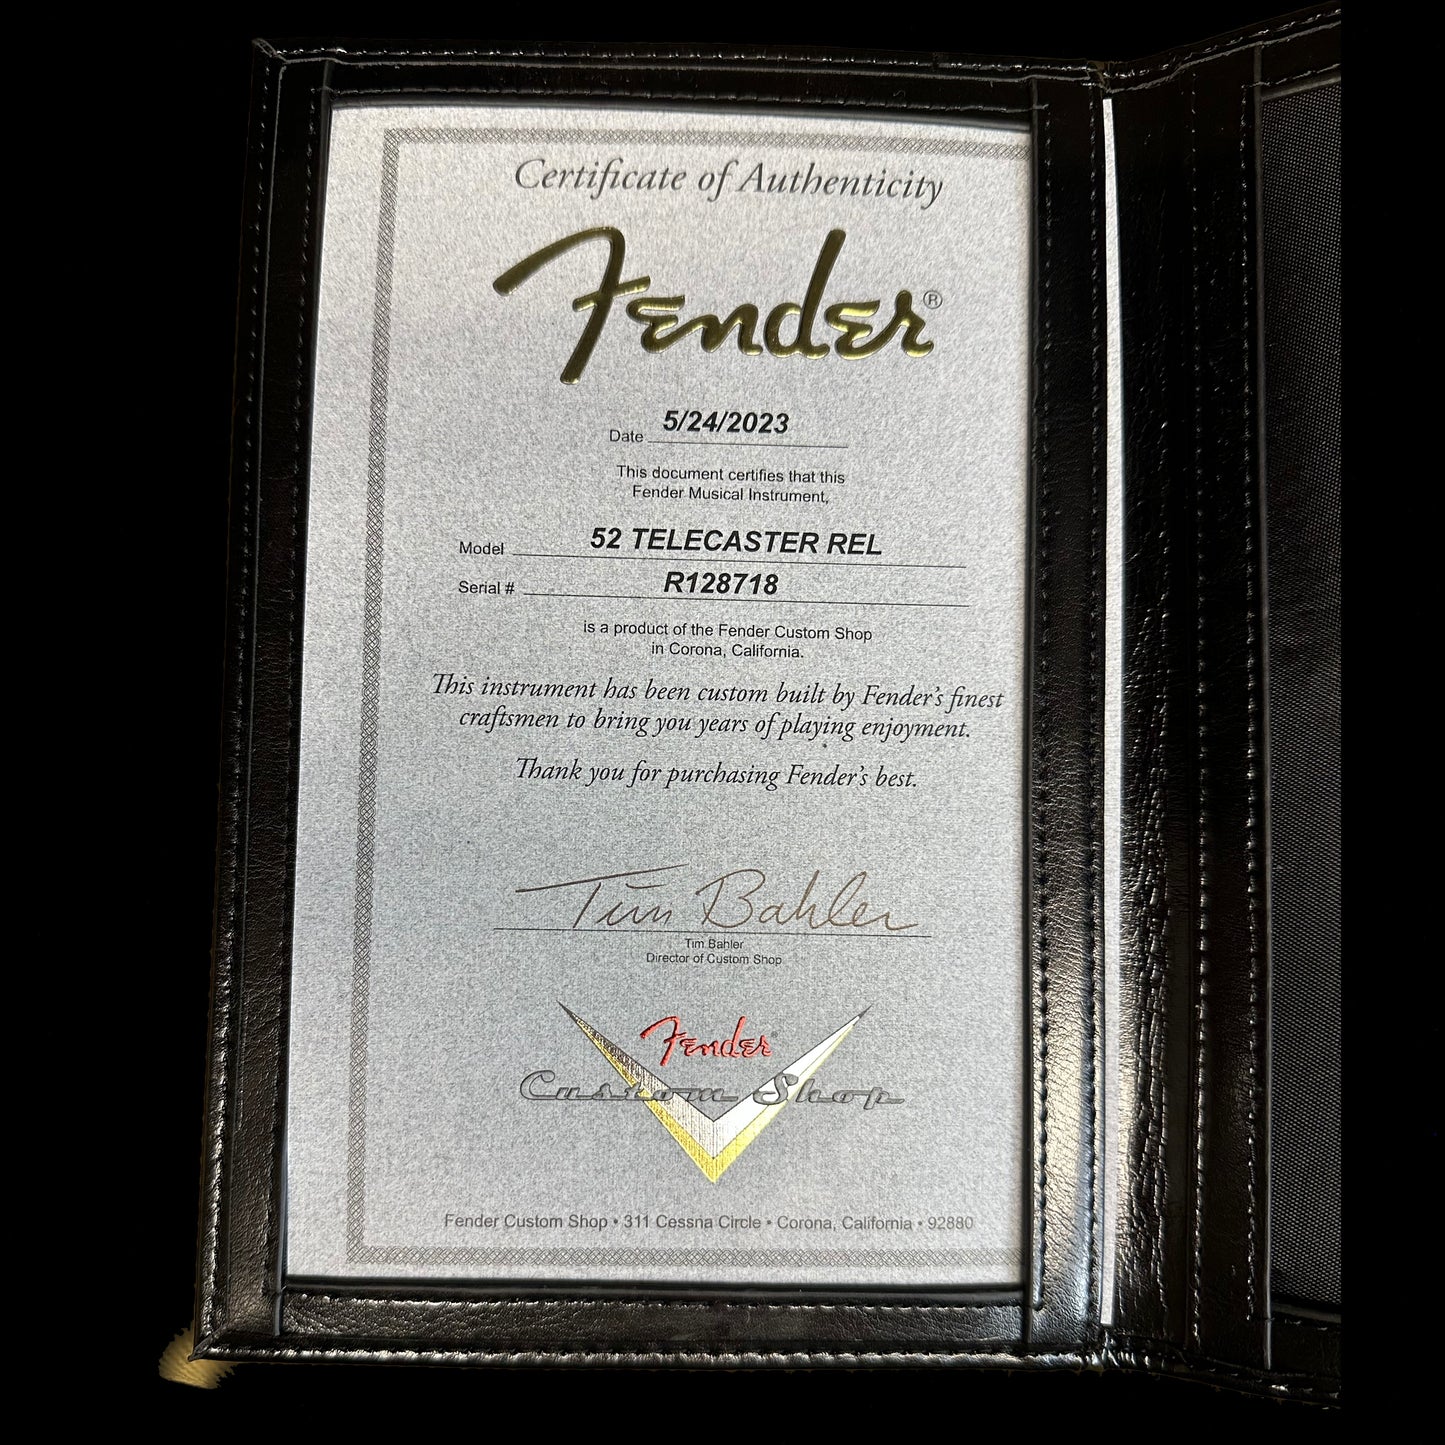 Fender Custom Shop 1952 Telecaster Relic Aged Nocaster Blonde Certificate of Authenticity.